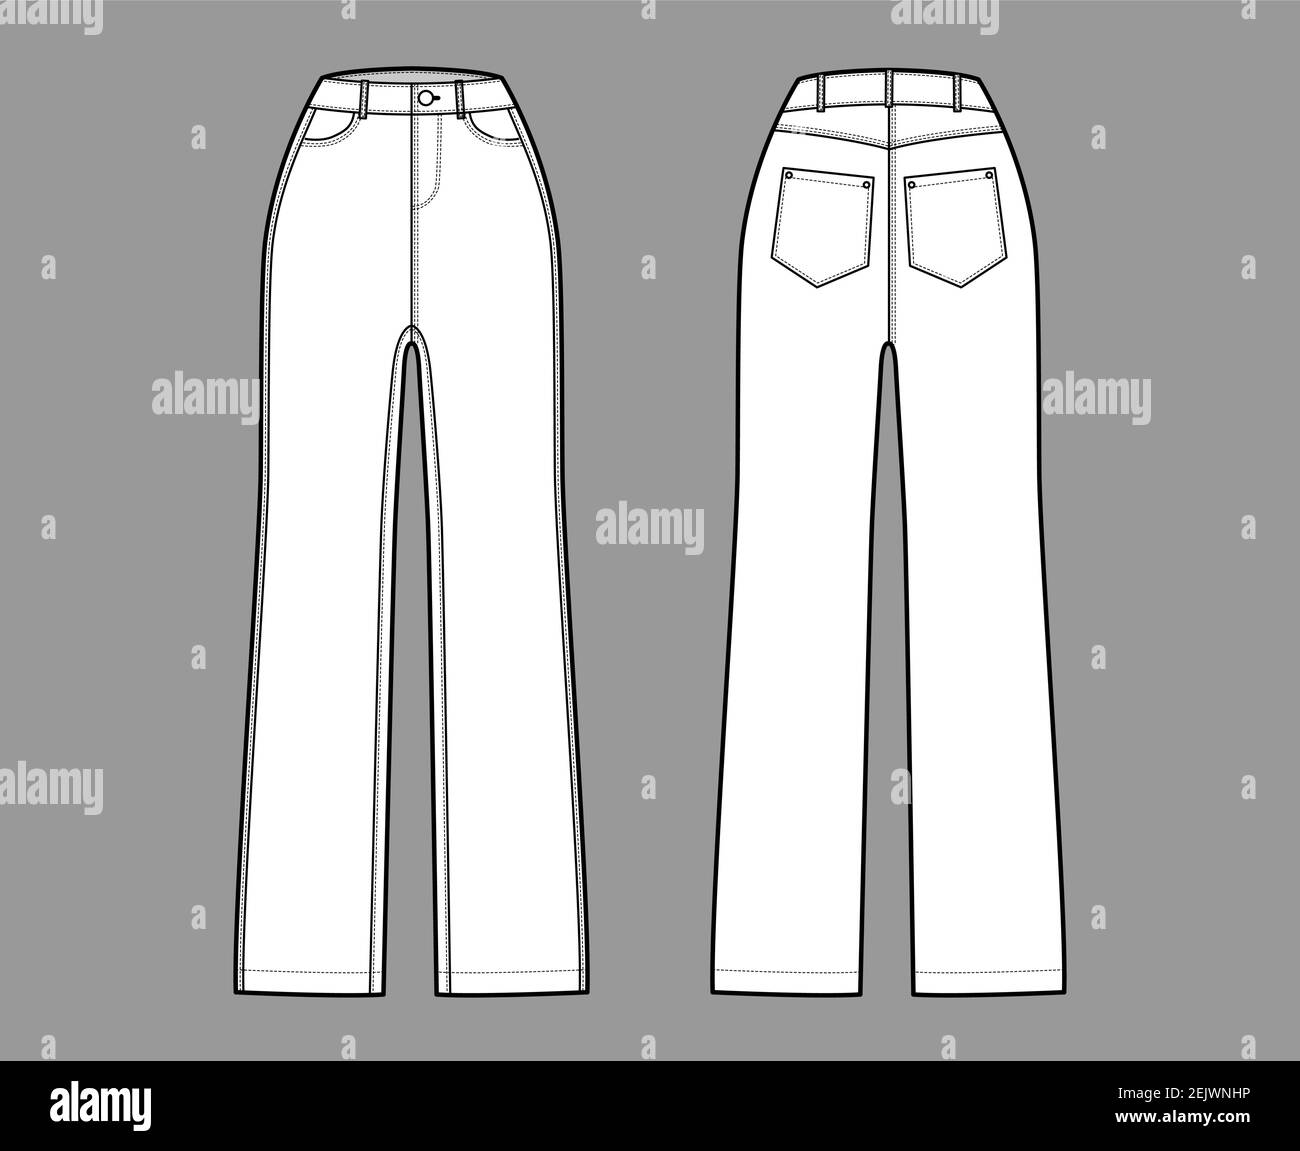 Jeans Denim pants technical fashion illustration with full length ...